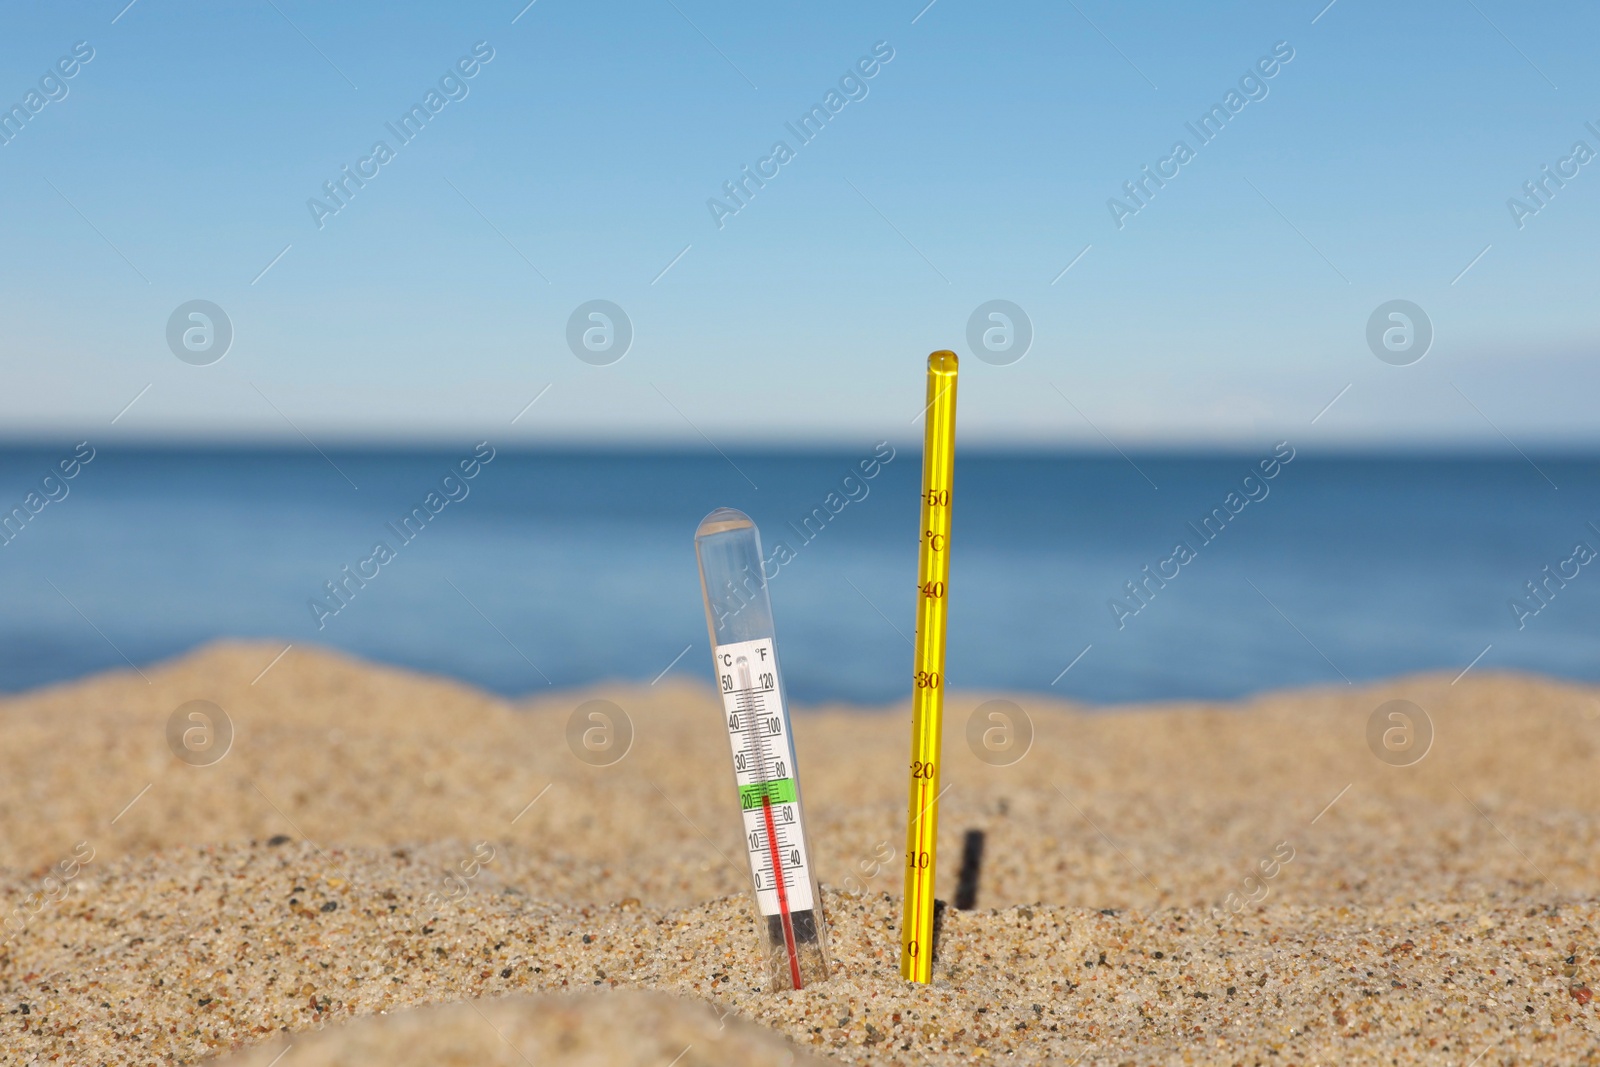 Photo of Different weather thermometers in sand near sea